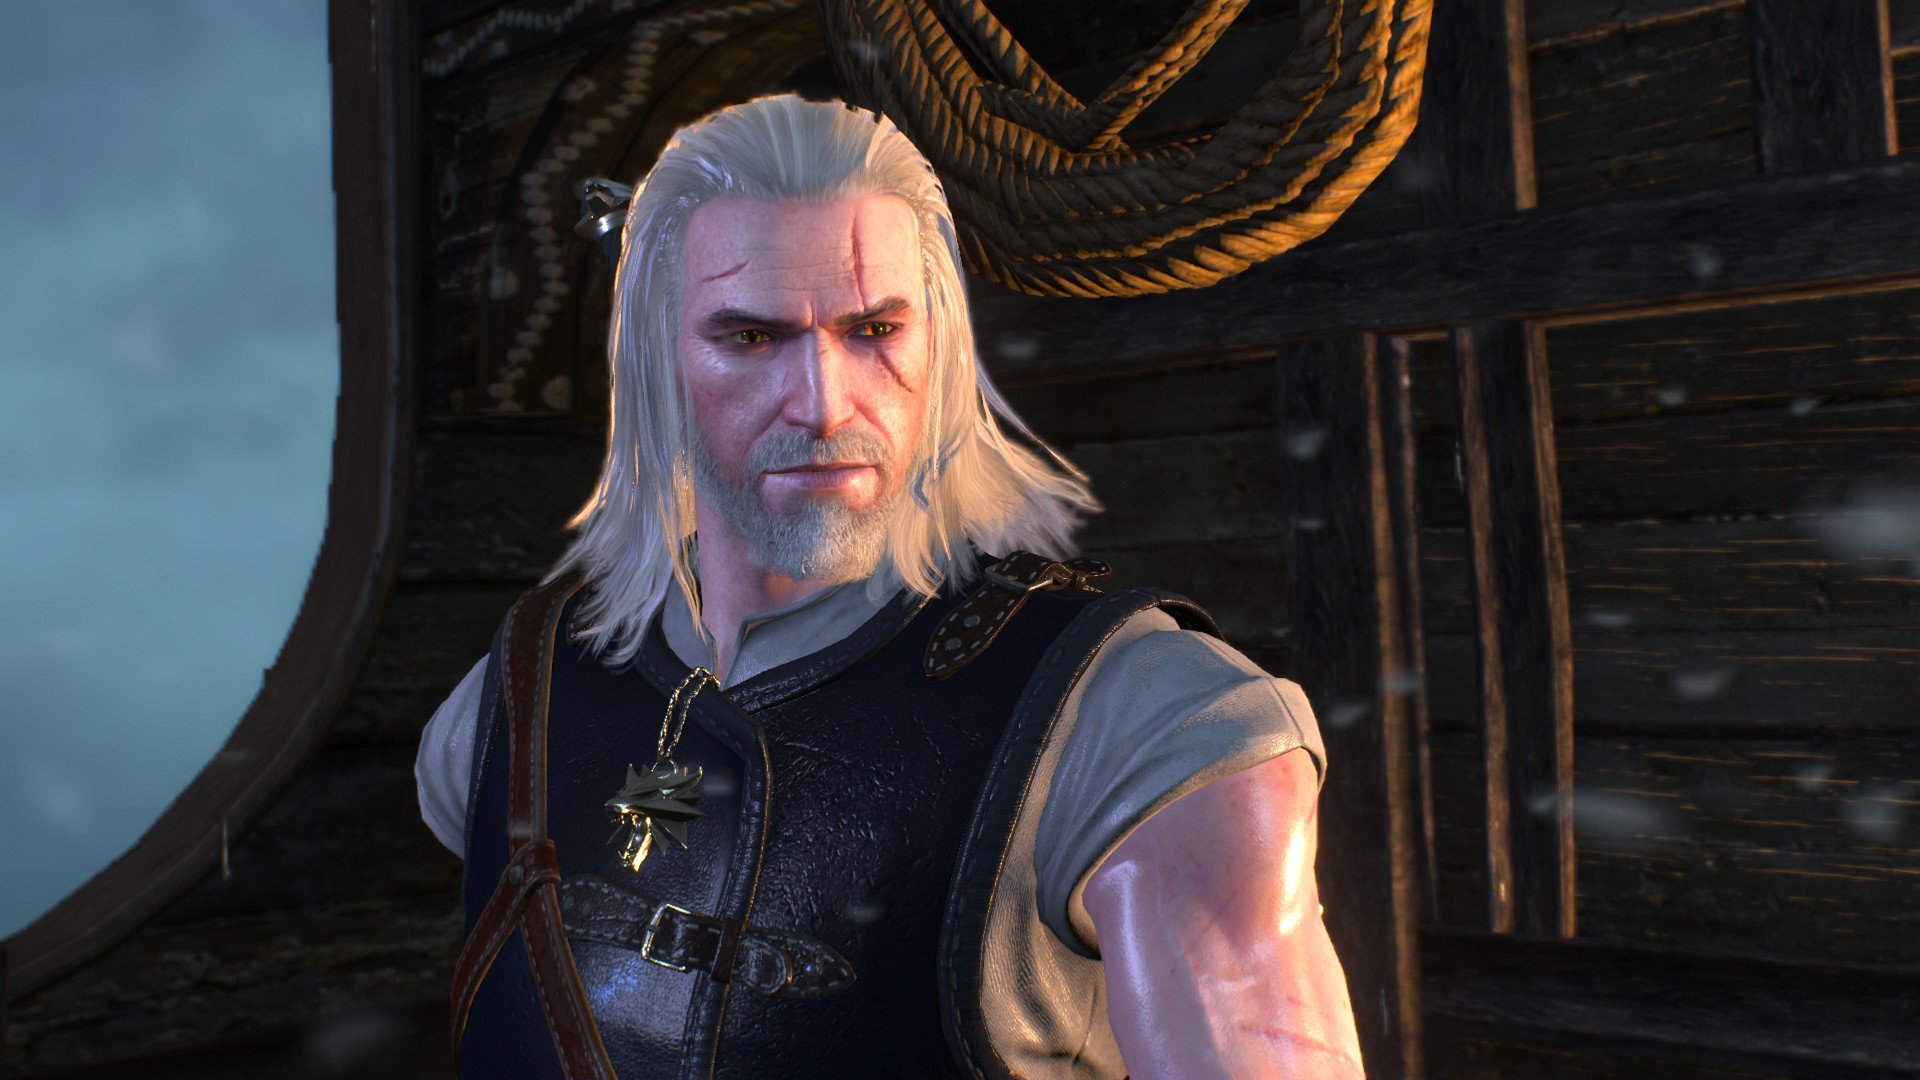 Looks like The Witcher 3 on Switch is getting PC cross-save